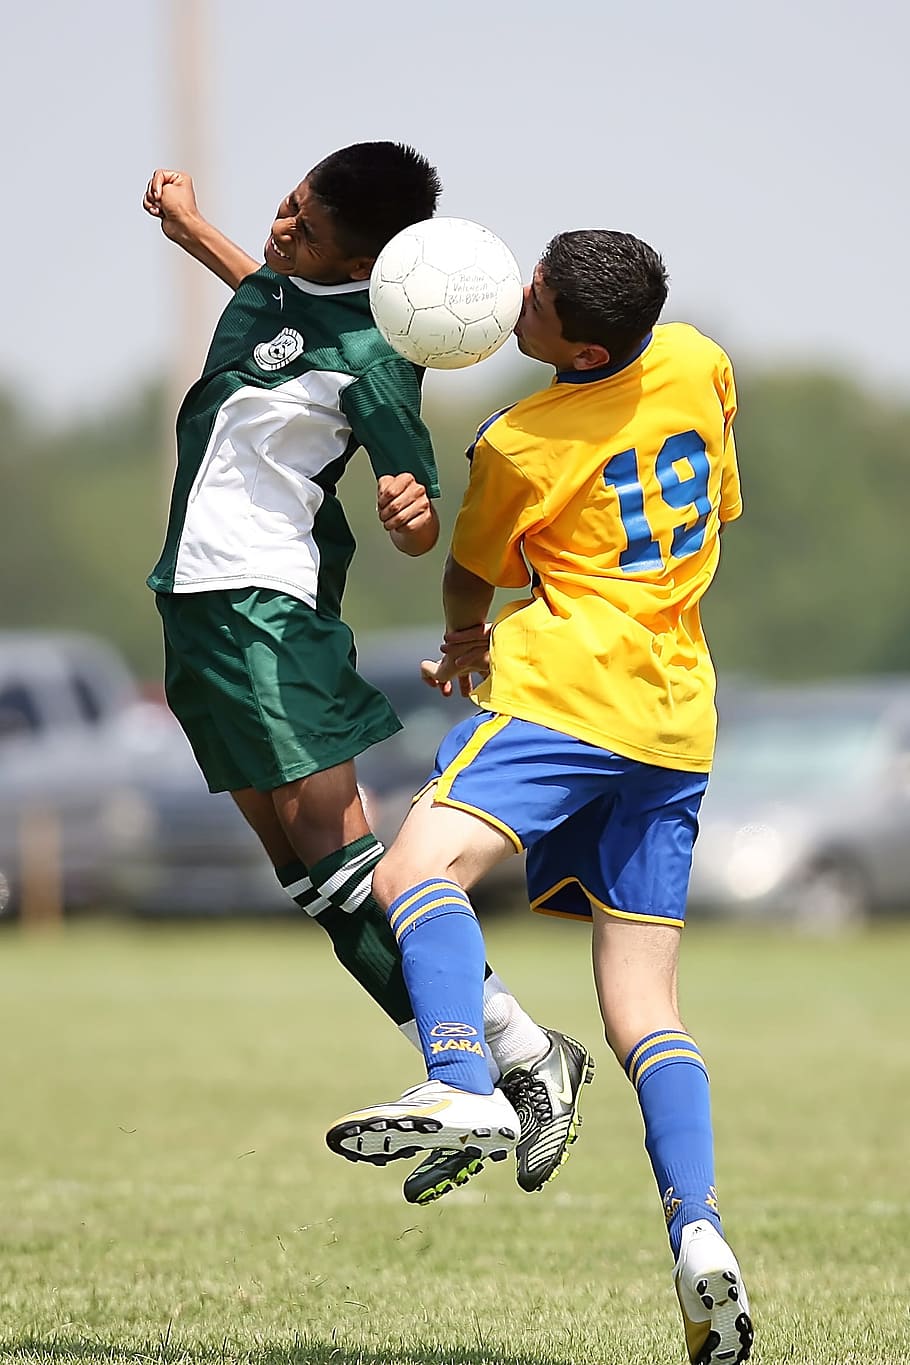 two, soccer players, heading, field, Soccer, Football, Conflict, Competition, player, boy